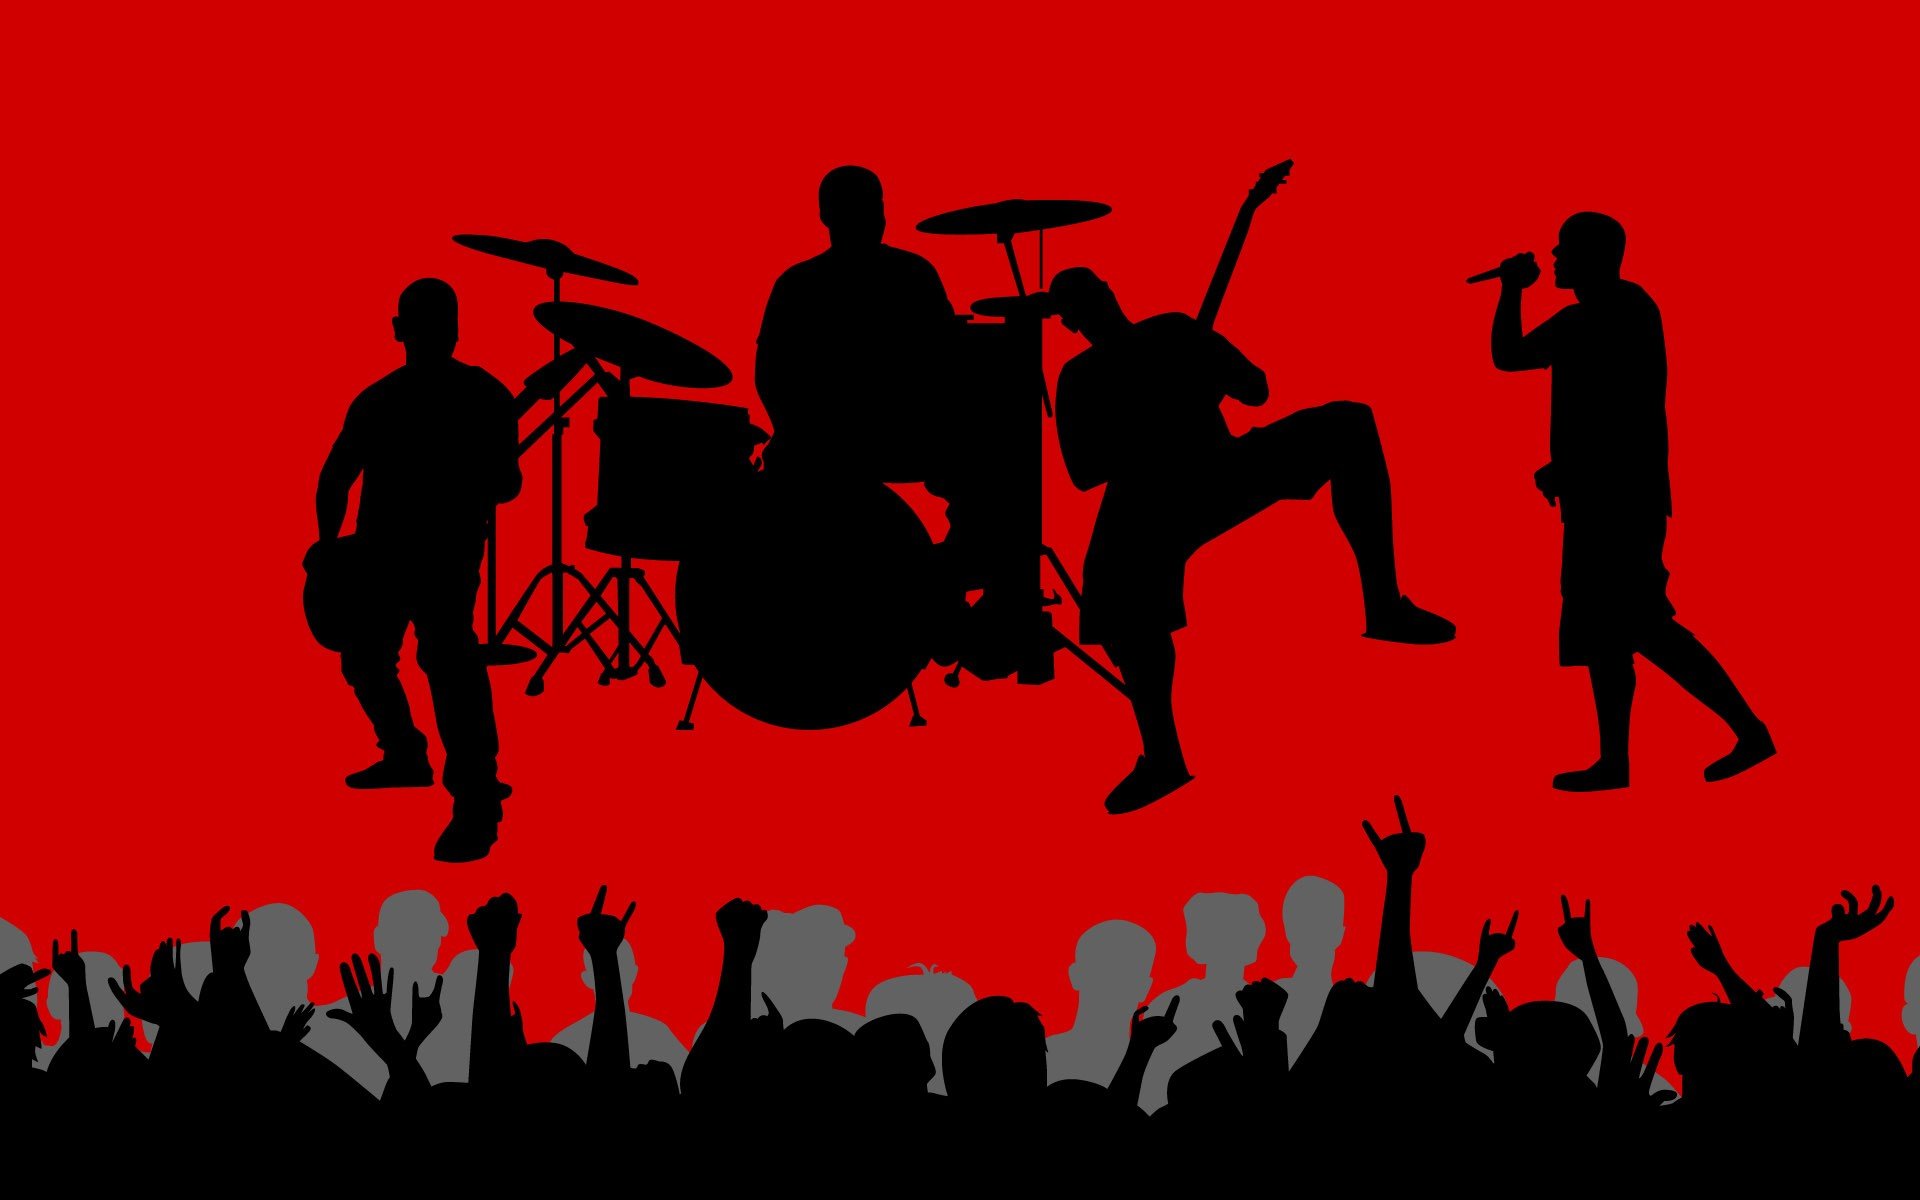 Band backgrounds